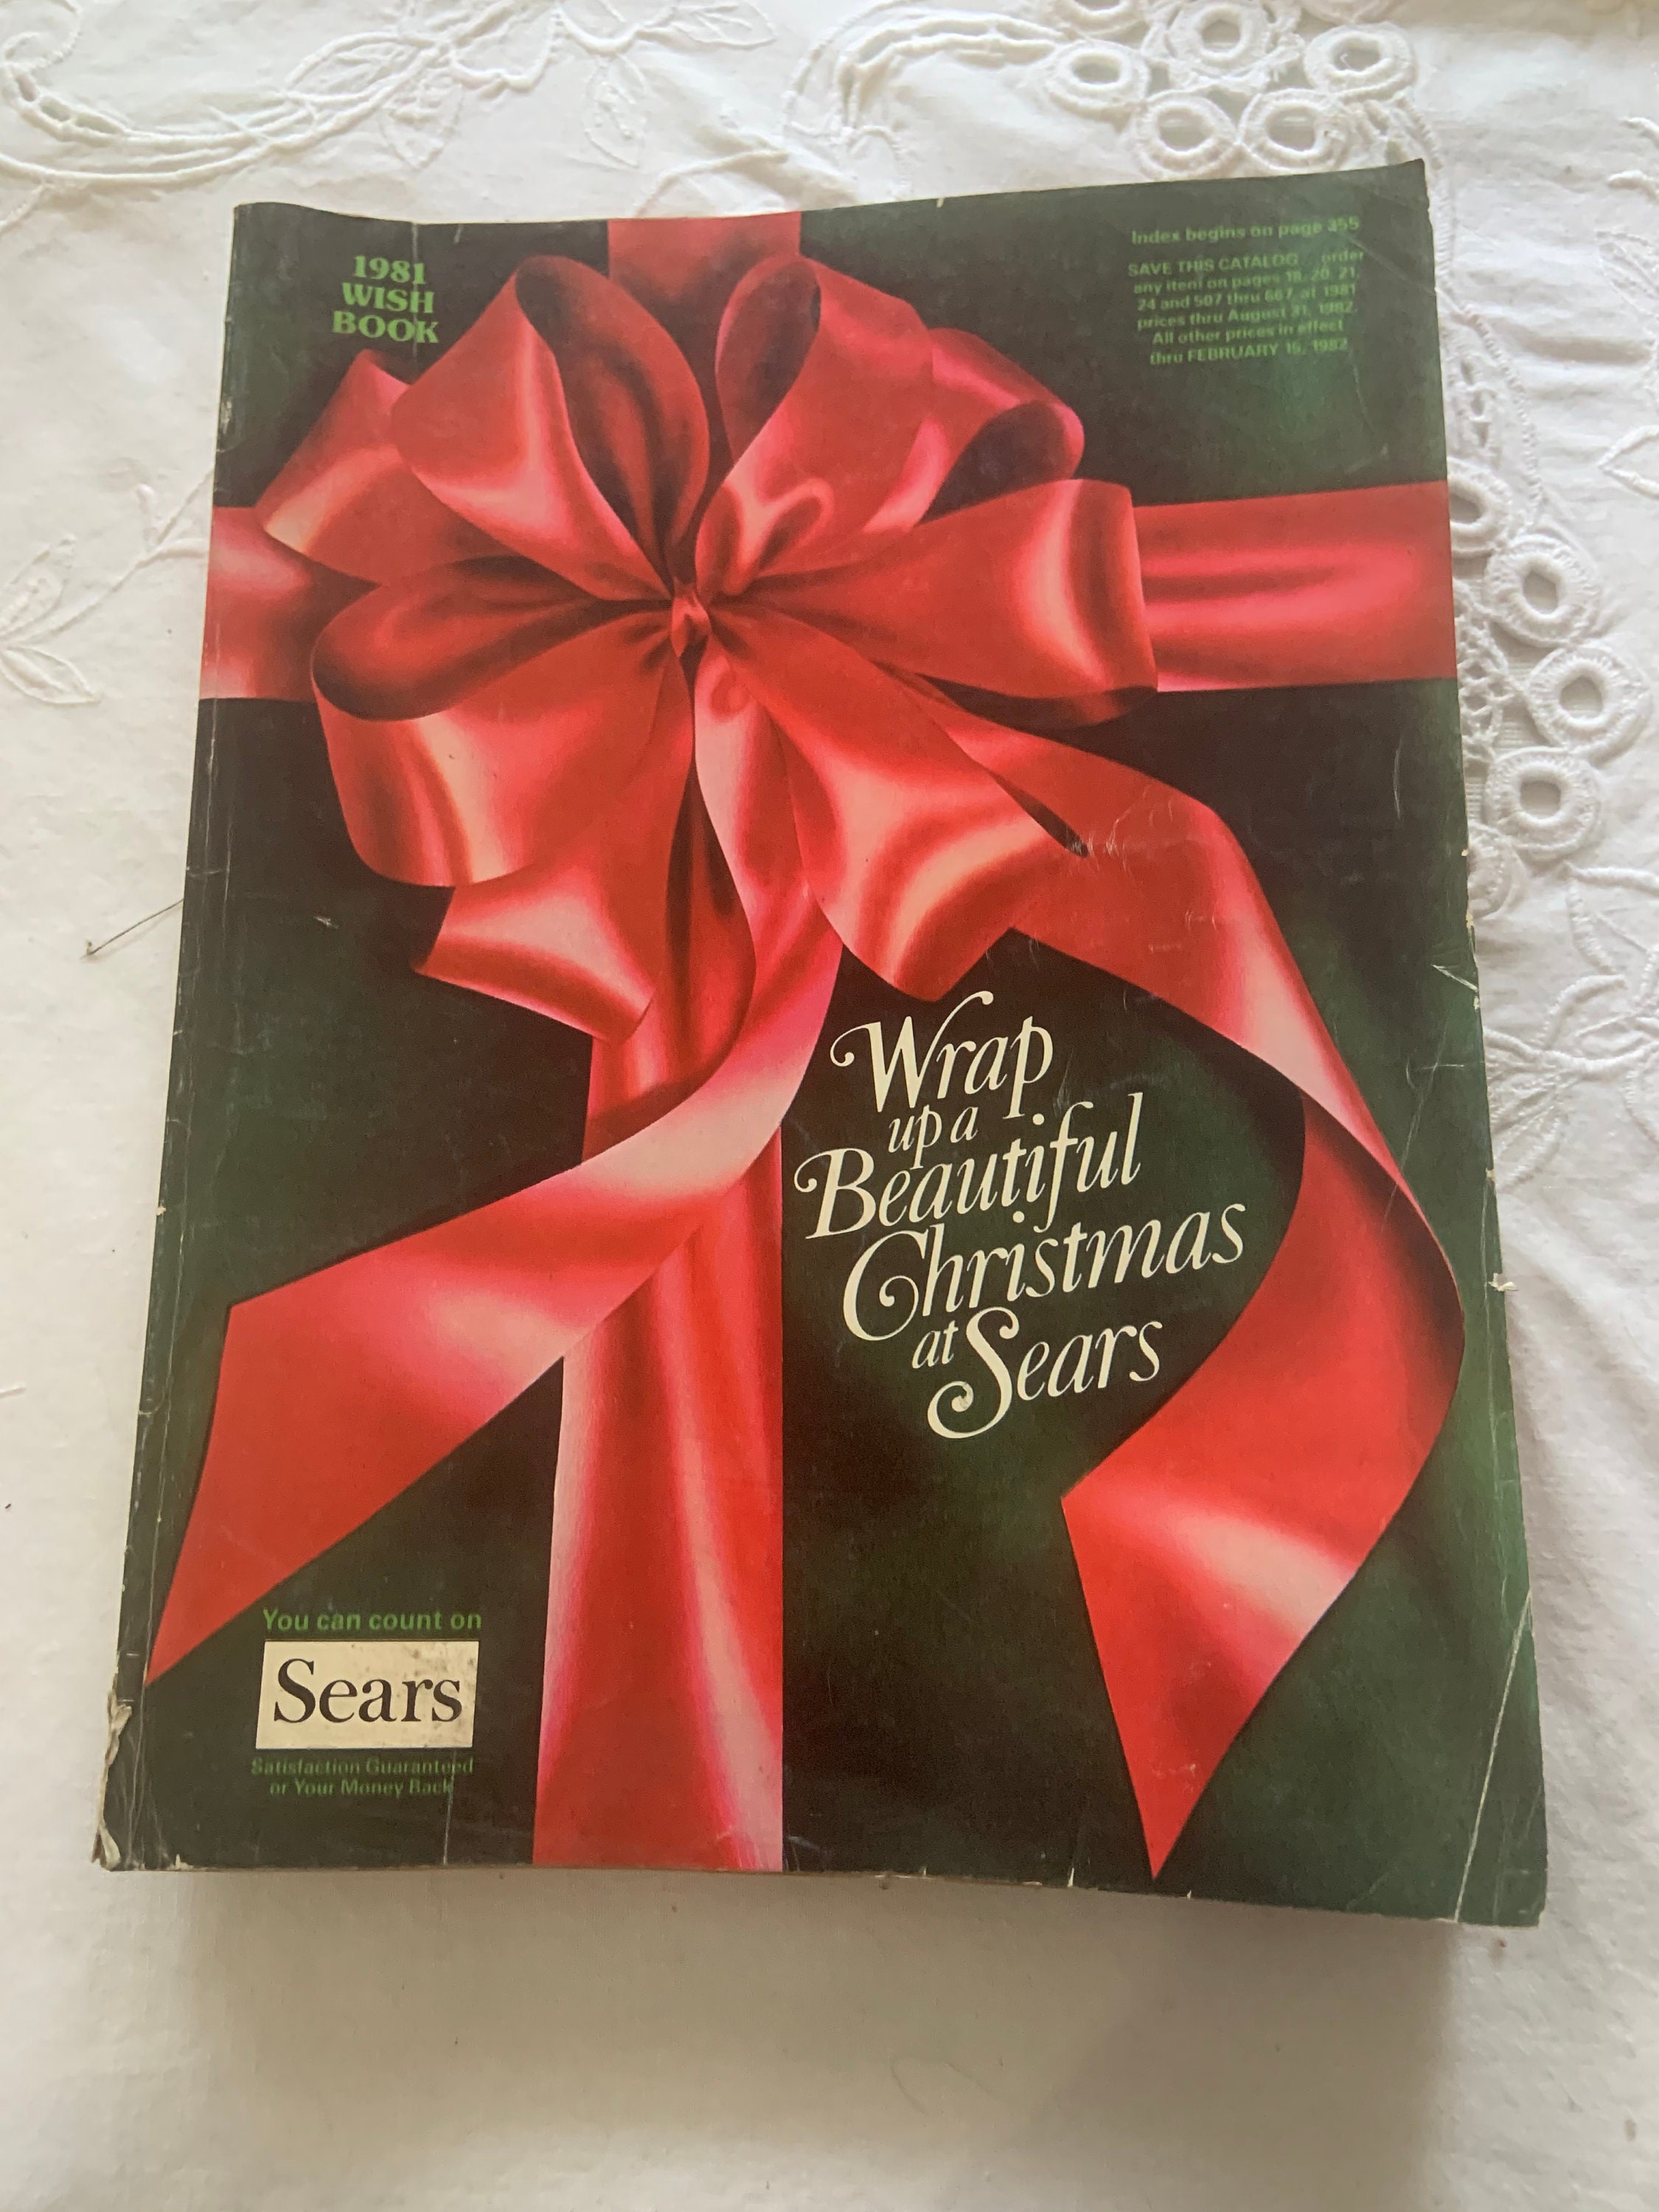 1979 JCPenney Christmas Book, Page 50 - Catalogs & Wishbooks